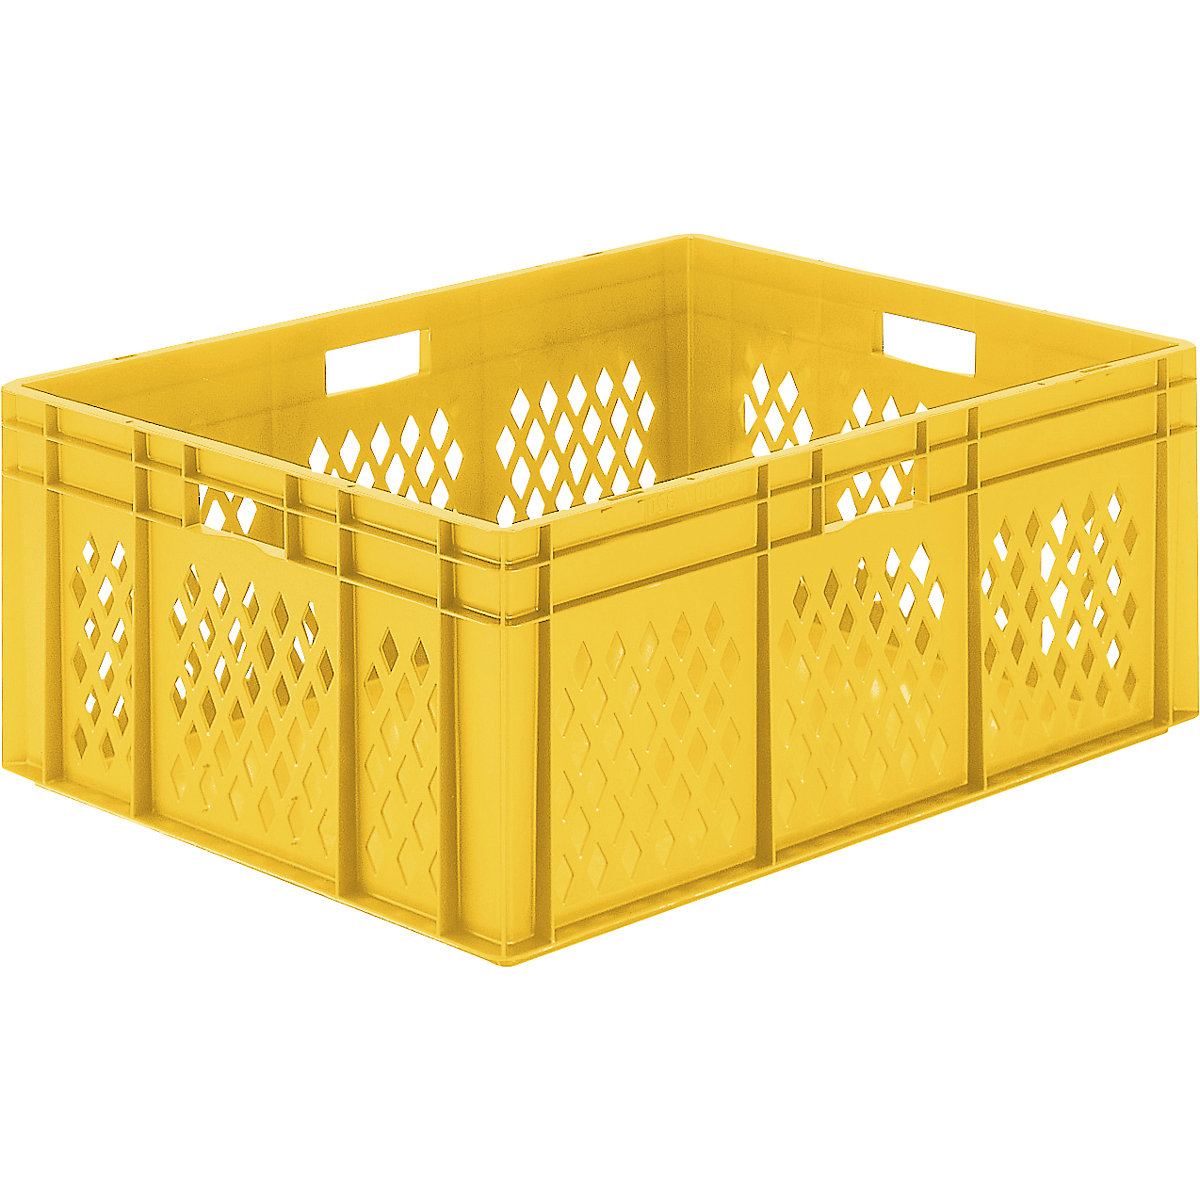 Euro stacking container, perforated walls, closed base, LxWxH 800 x 600 x 320 mm, yellow, pack of 2-5